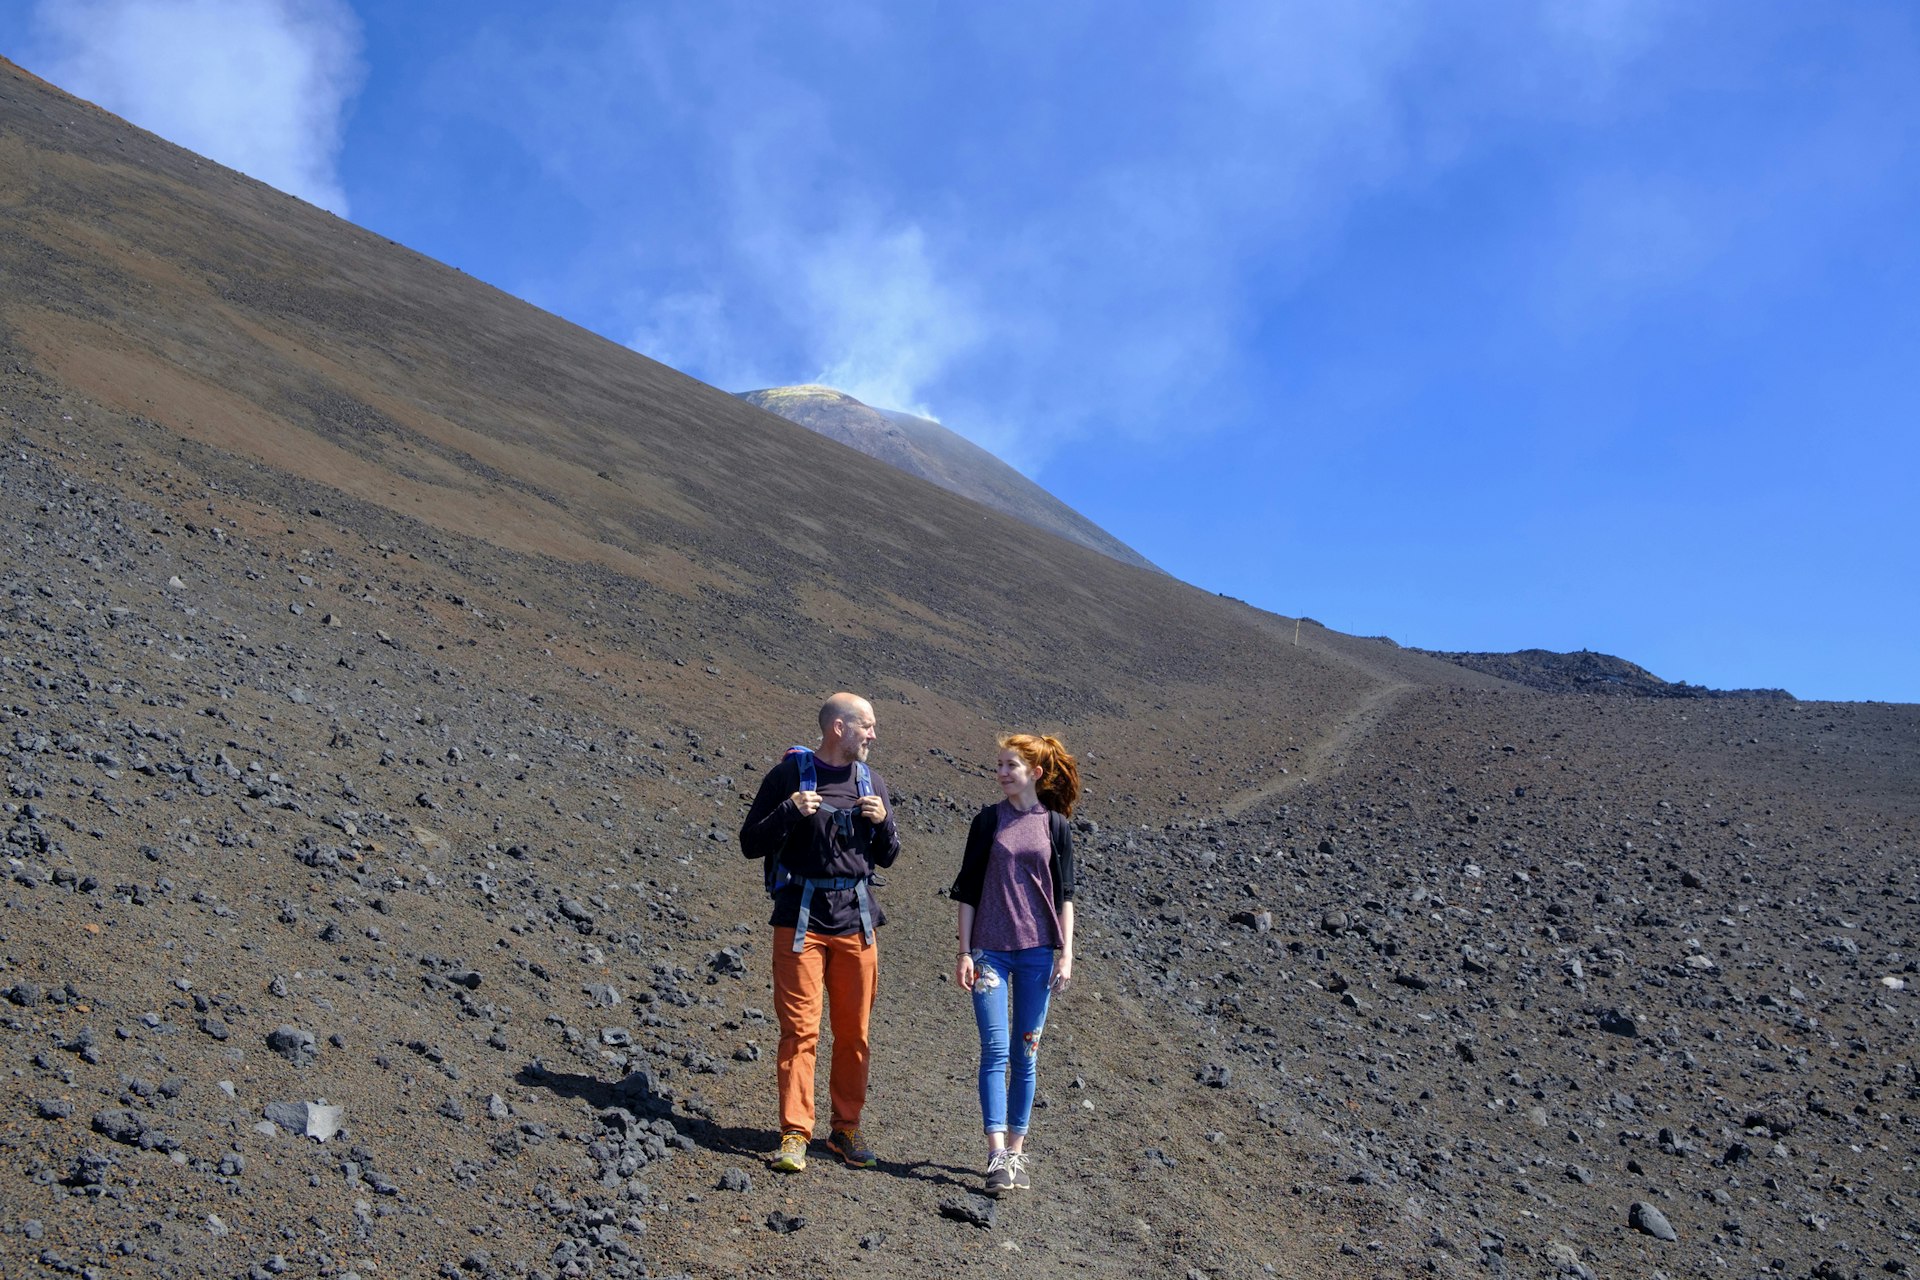 A father and daughter chat as they walk down a volcanic path